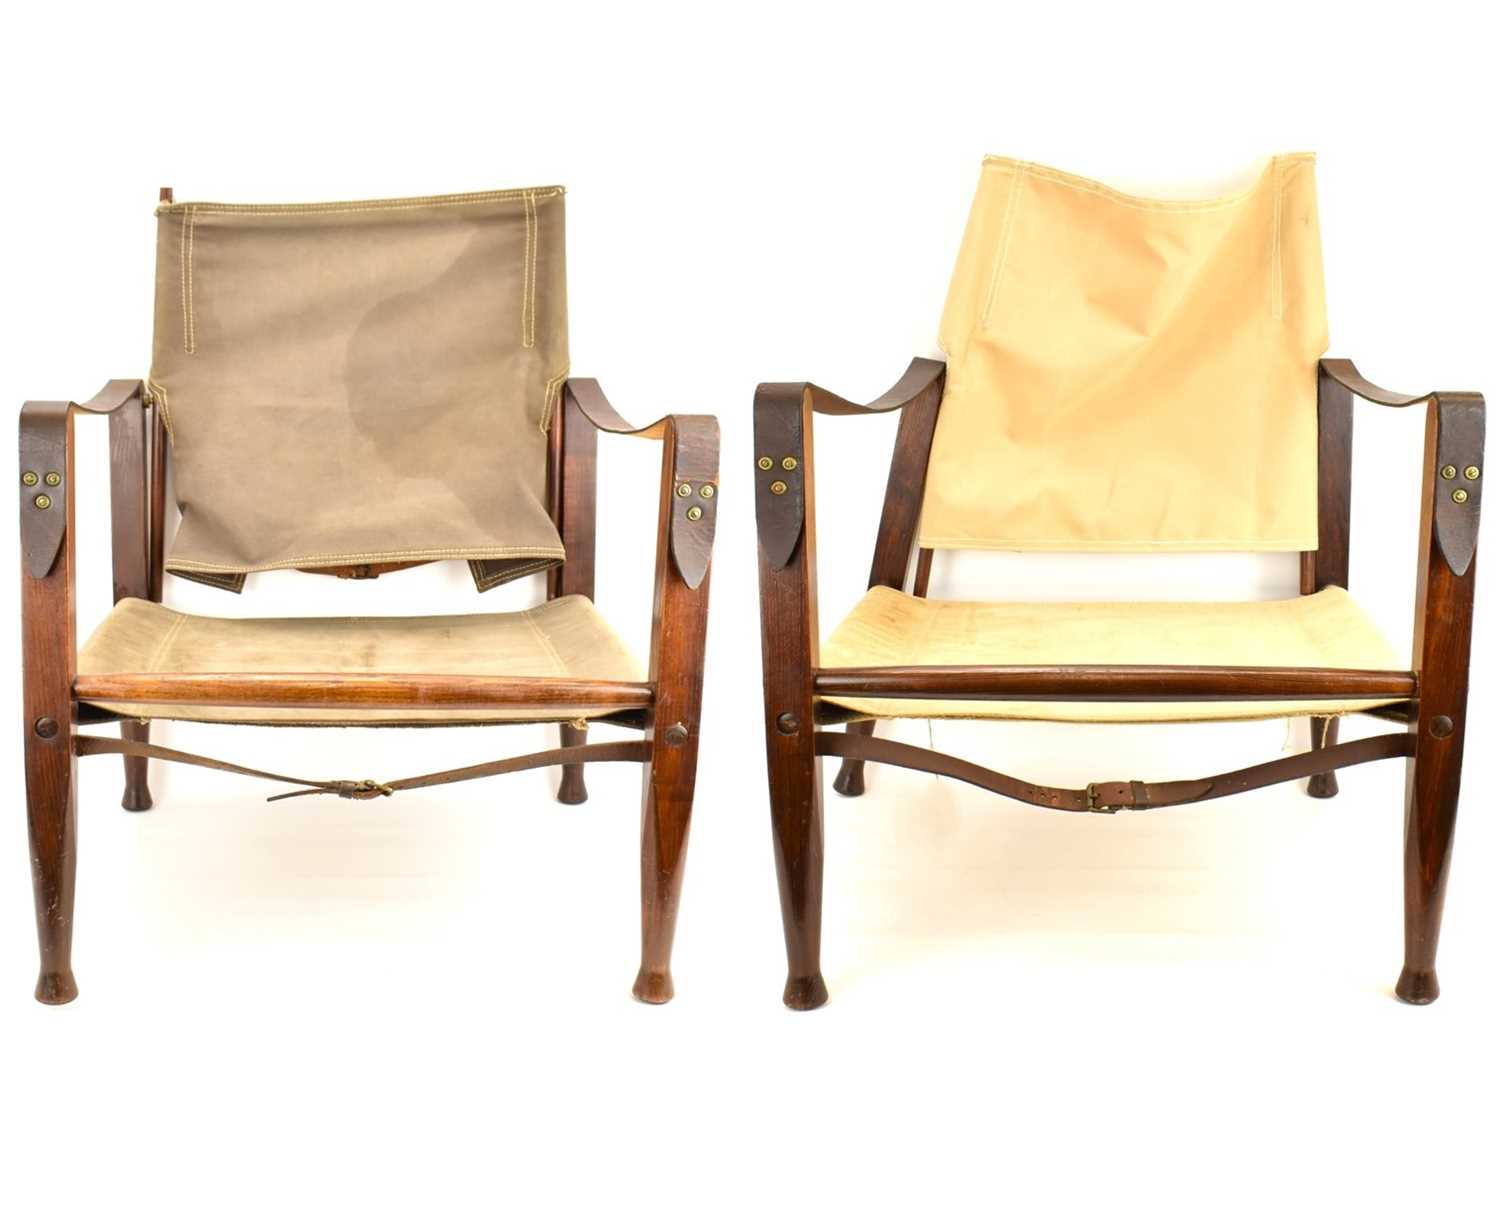 KAARE KLINT, DENMARK; a pair of ash and canvas safari chairs, marked 'Denmark 25160' to back